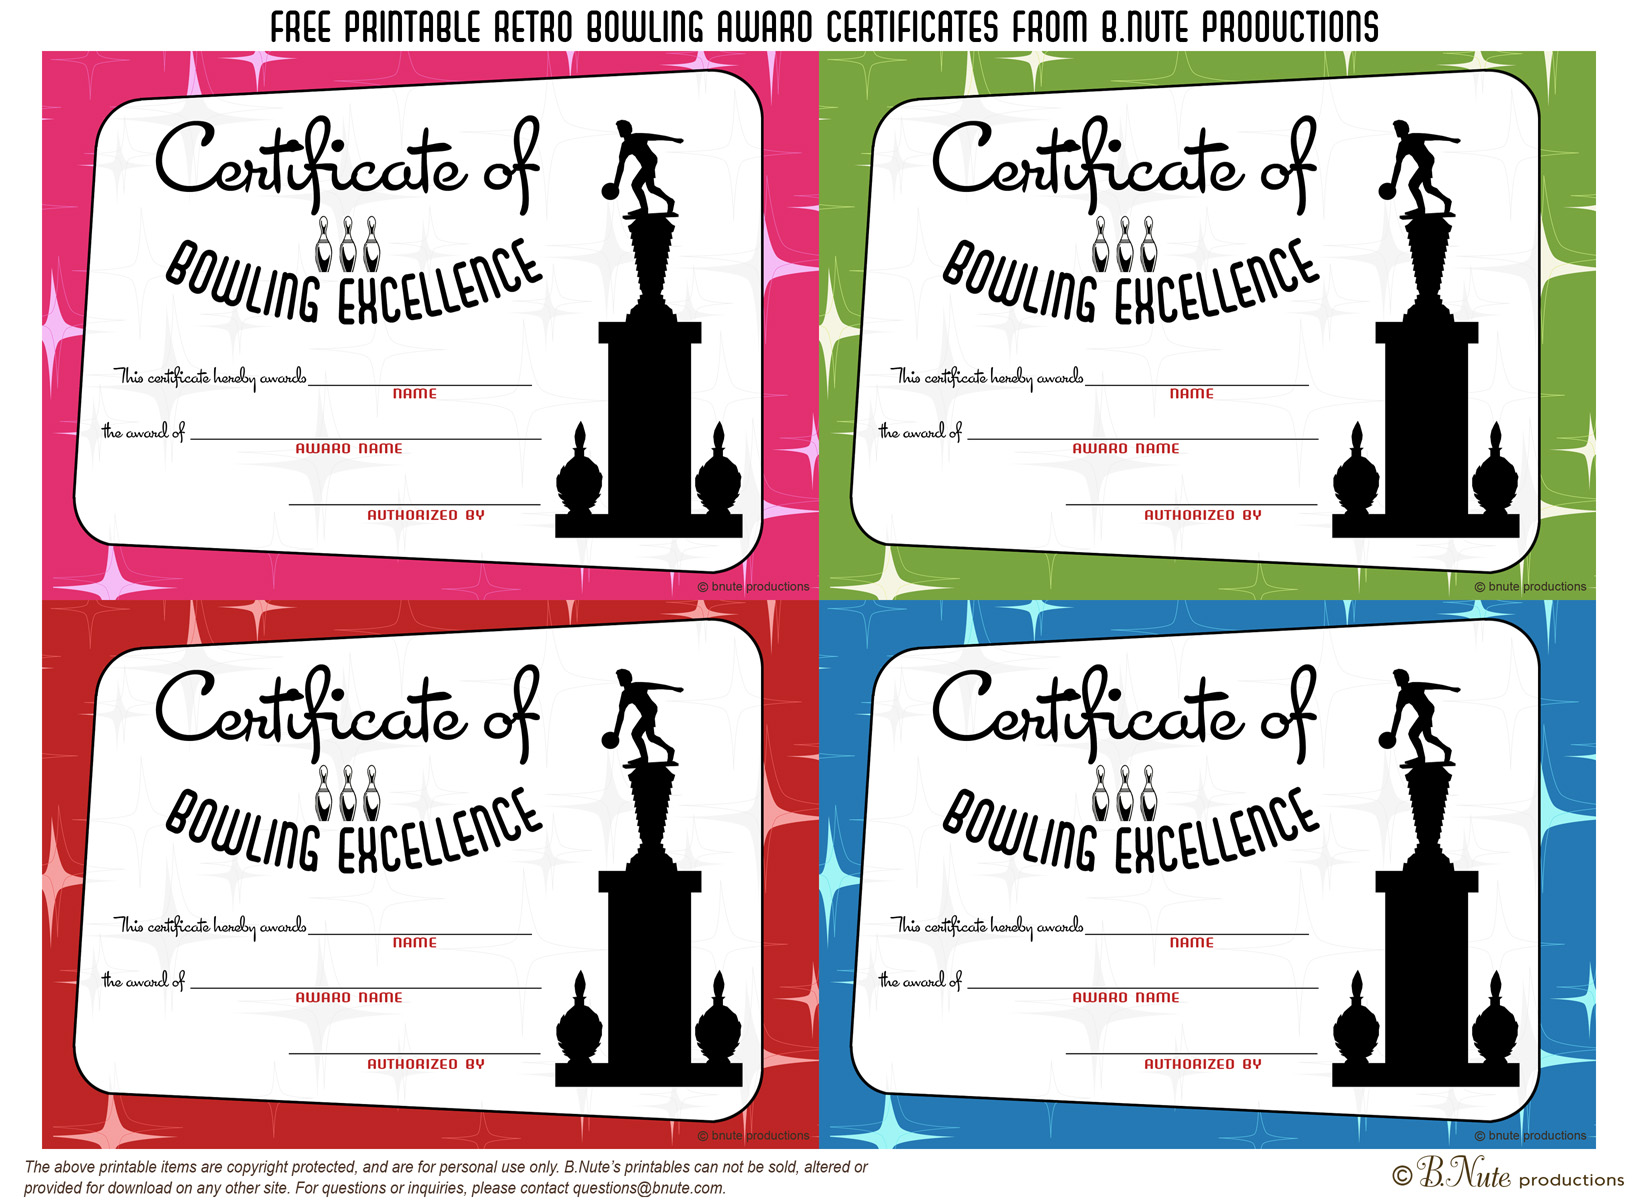 bnute productions: free printable bowling award certificates